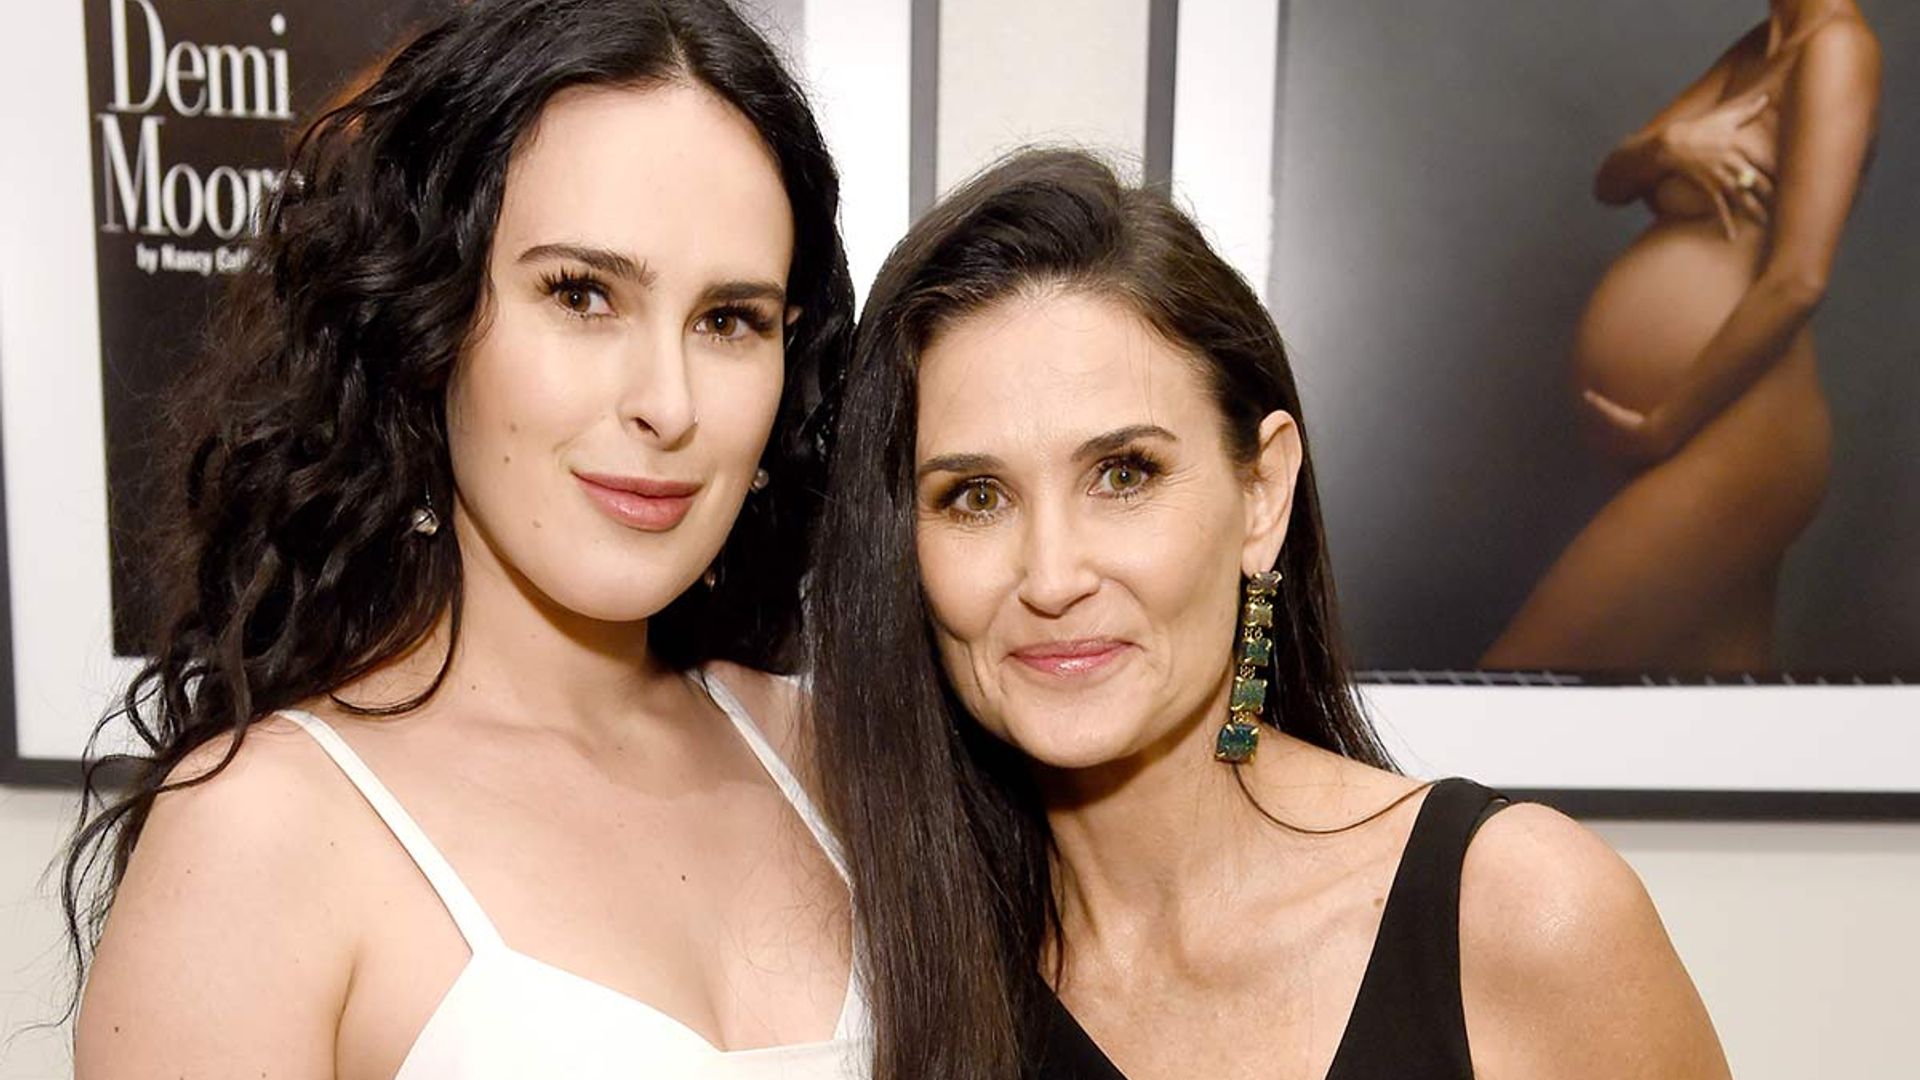 Rumer Willis and Demi Moore Wear Identical Outfits on Instagram